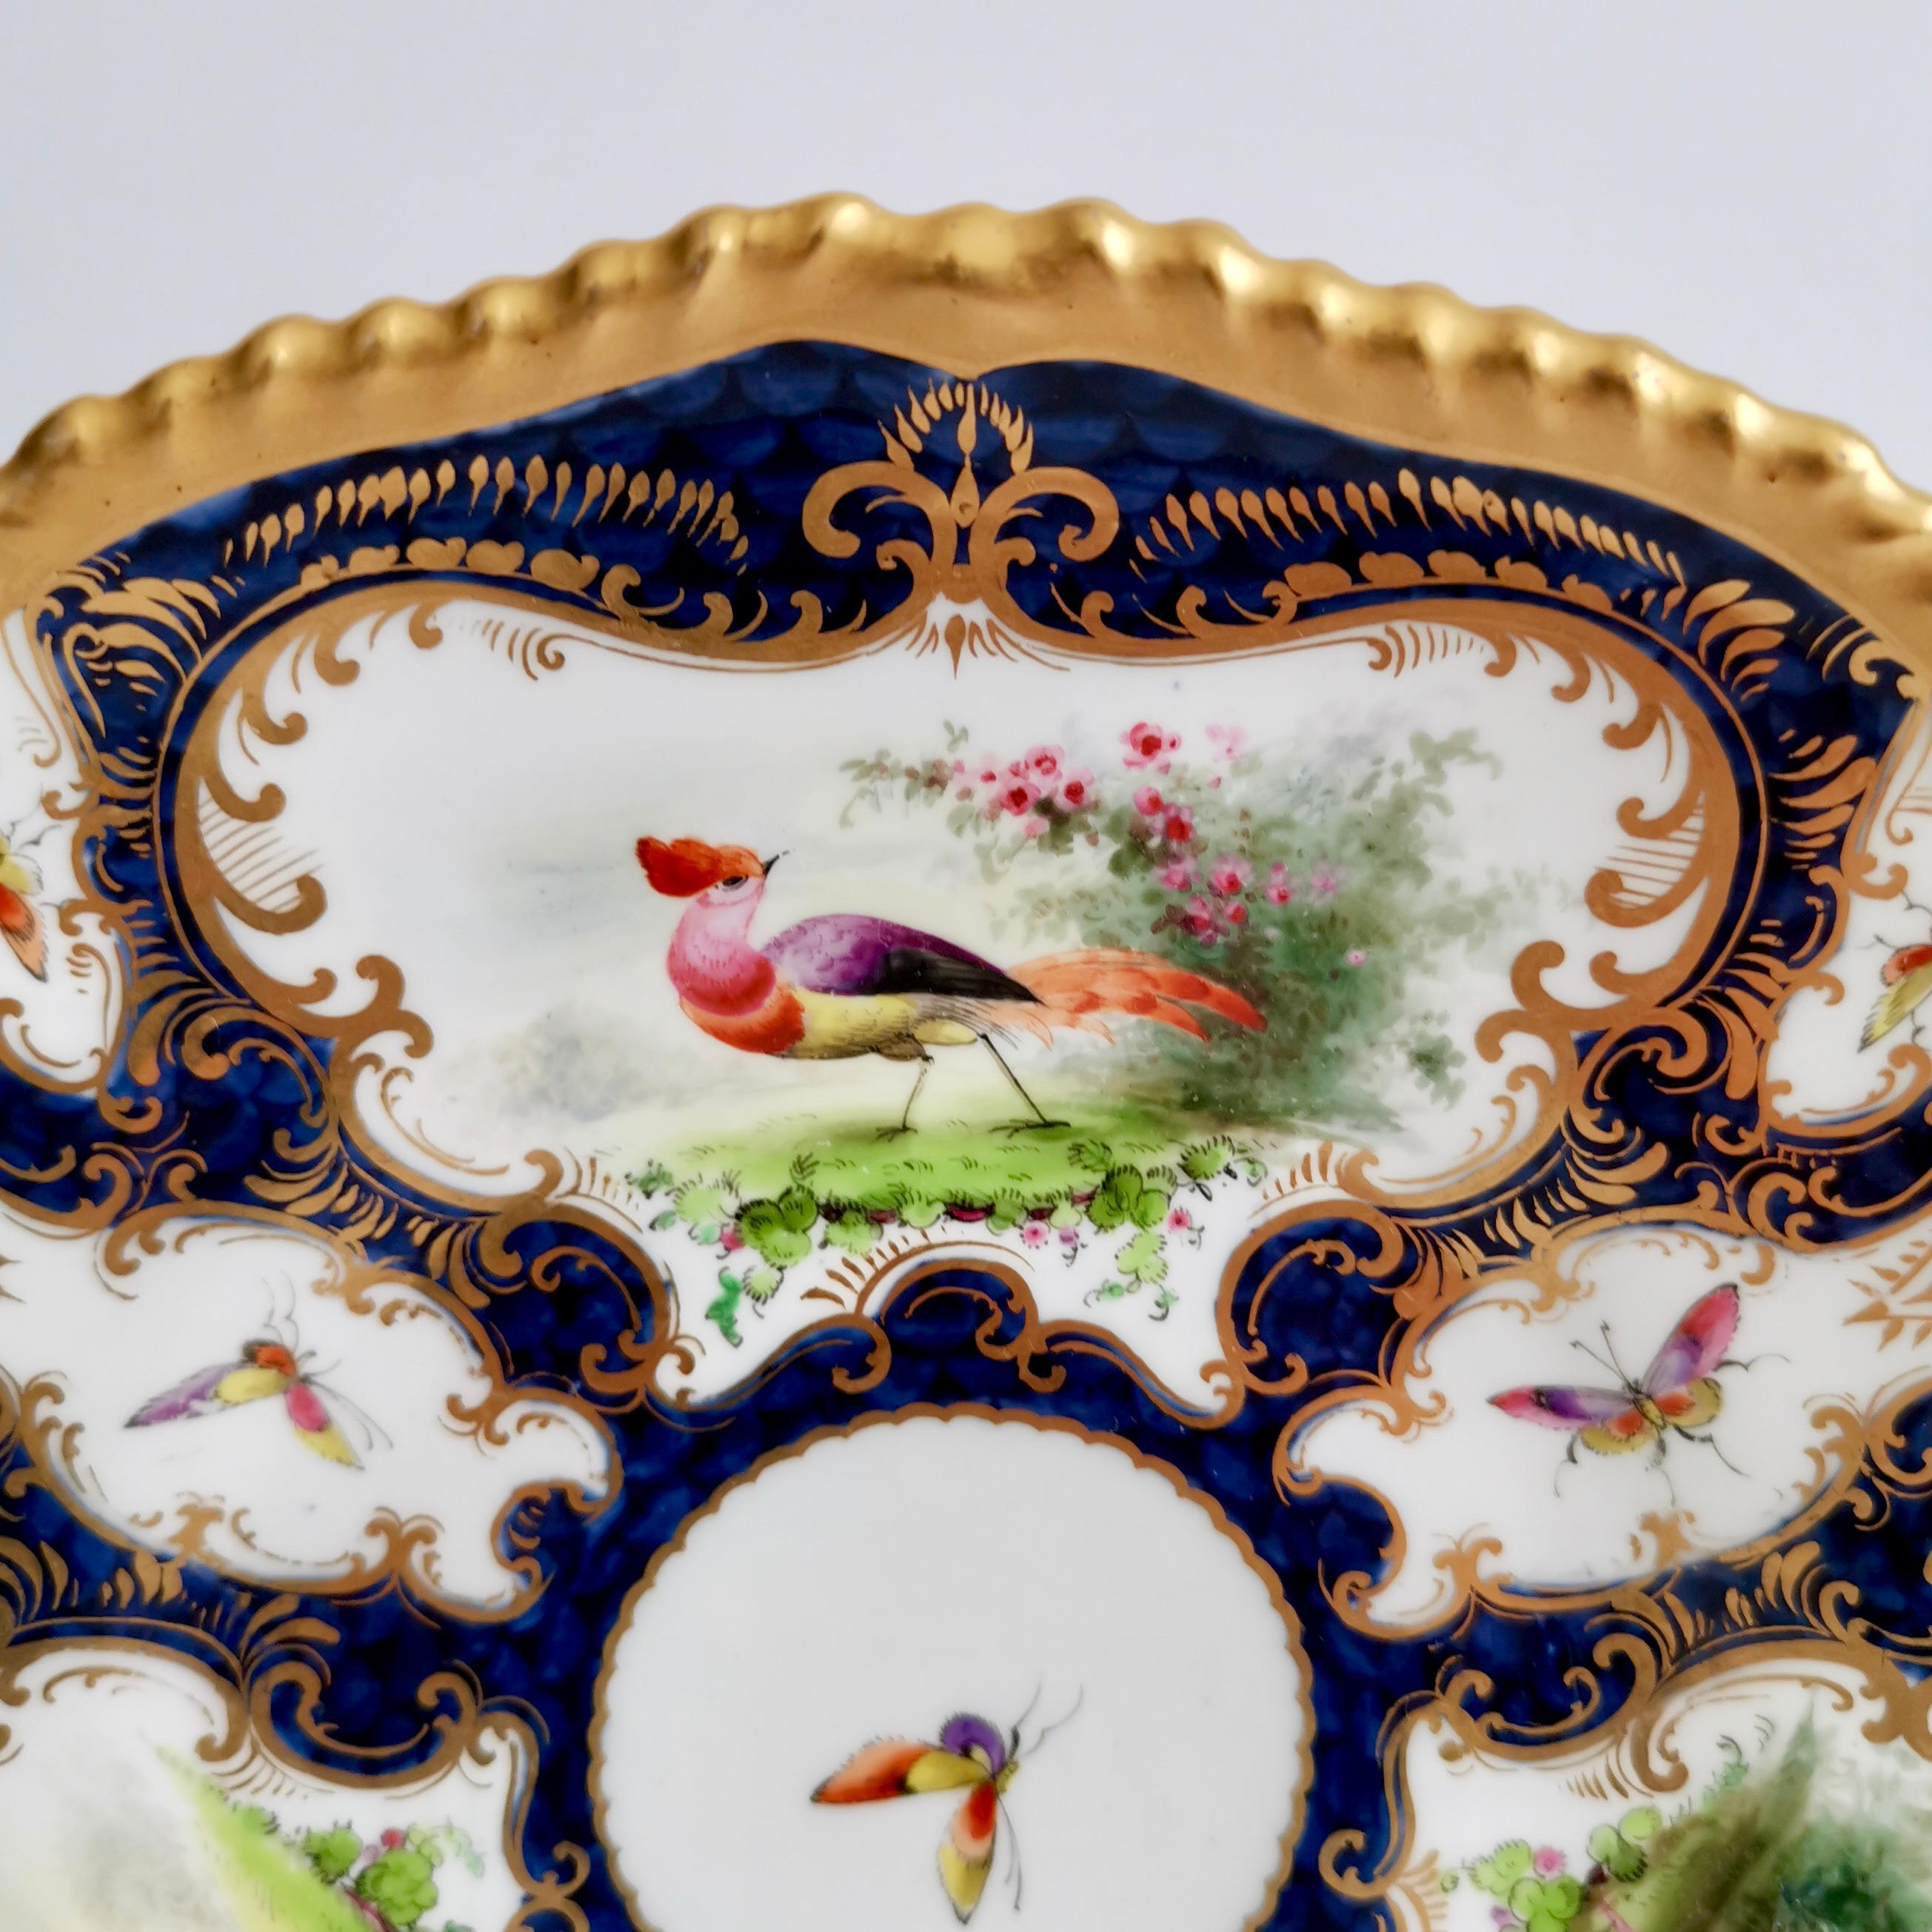 Hand-Painted Grainger Worcester Porcelain Plate, Blue Scale, Sevres Birds & Insects, 1899 '2'